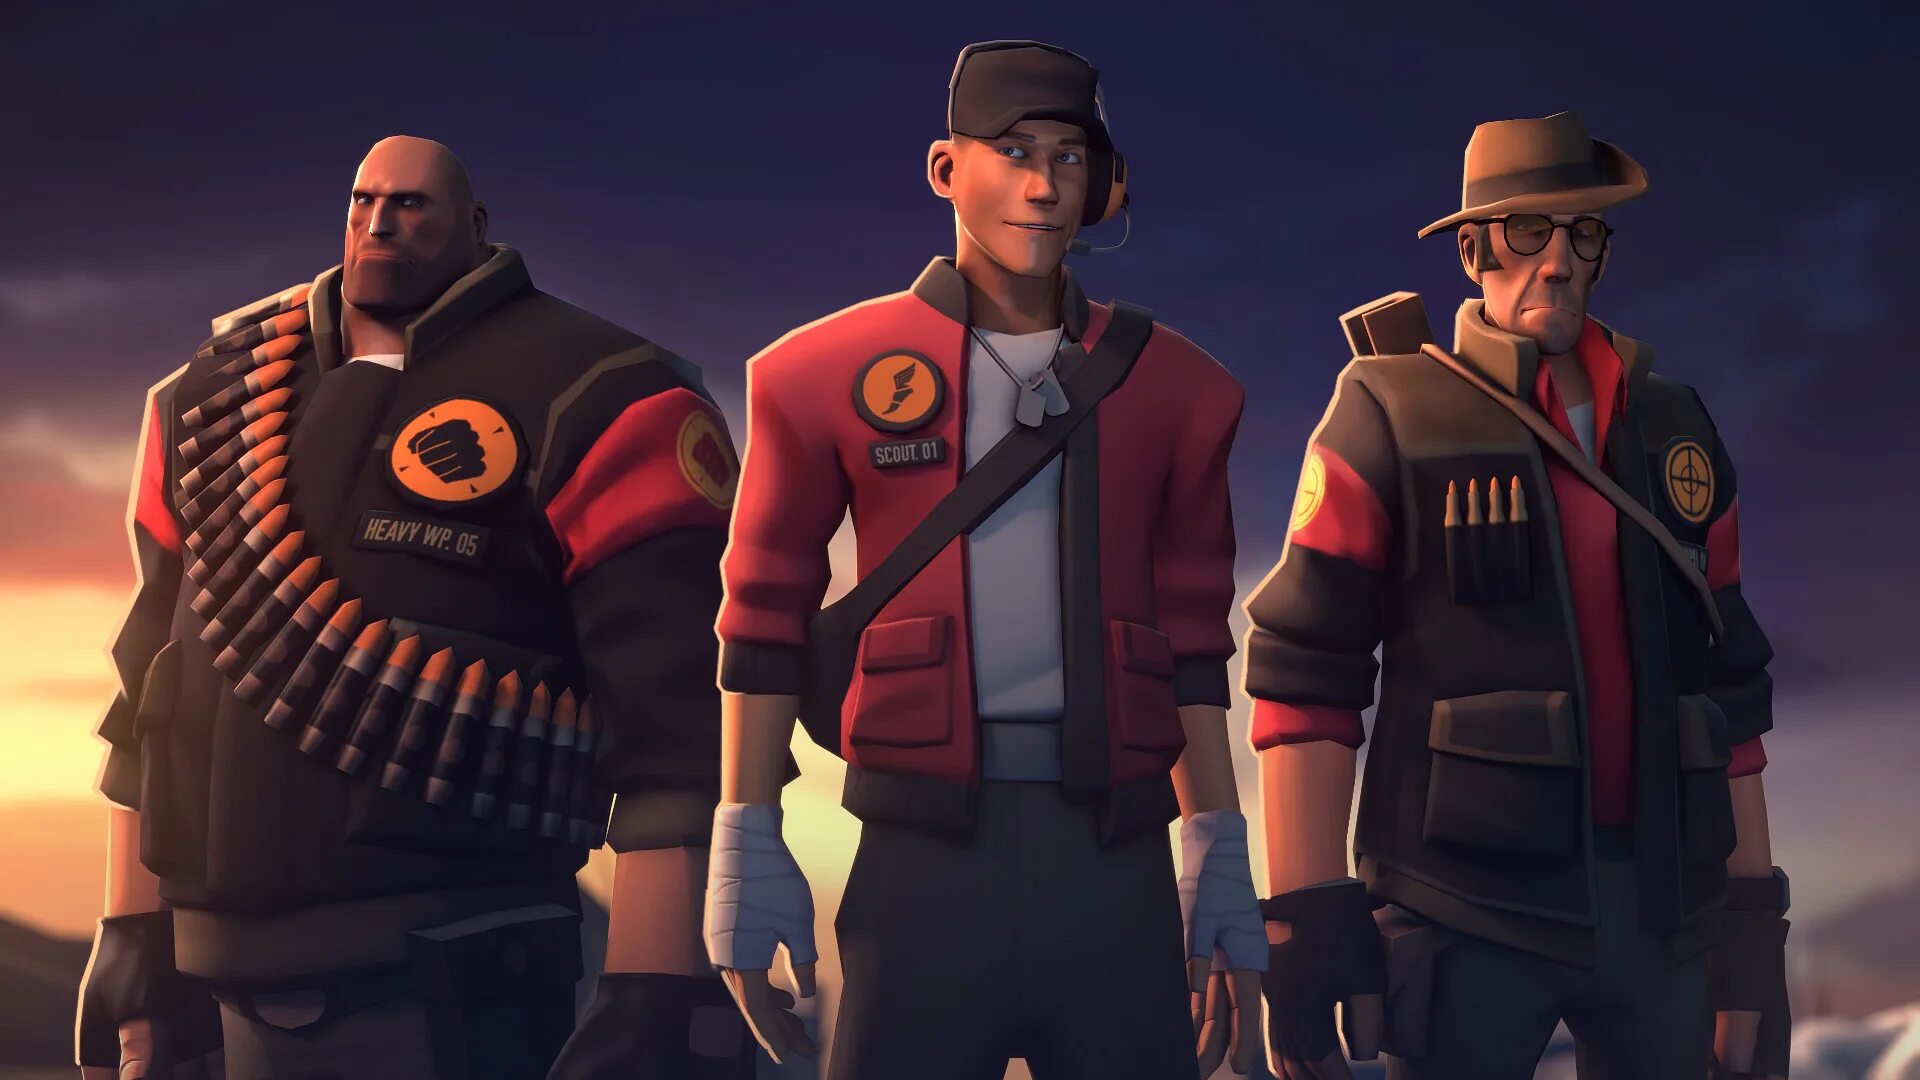 Tf2 selling. Team Fortress 2. Team Fortress 2 Scout. Team Fortress 2 разведчик. Скаут тф2.